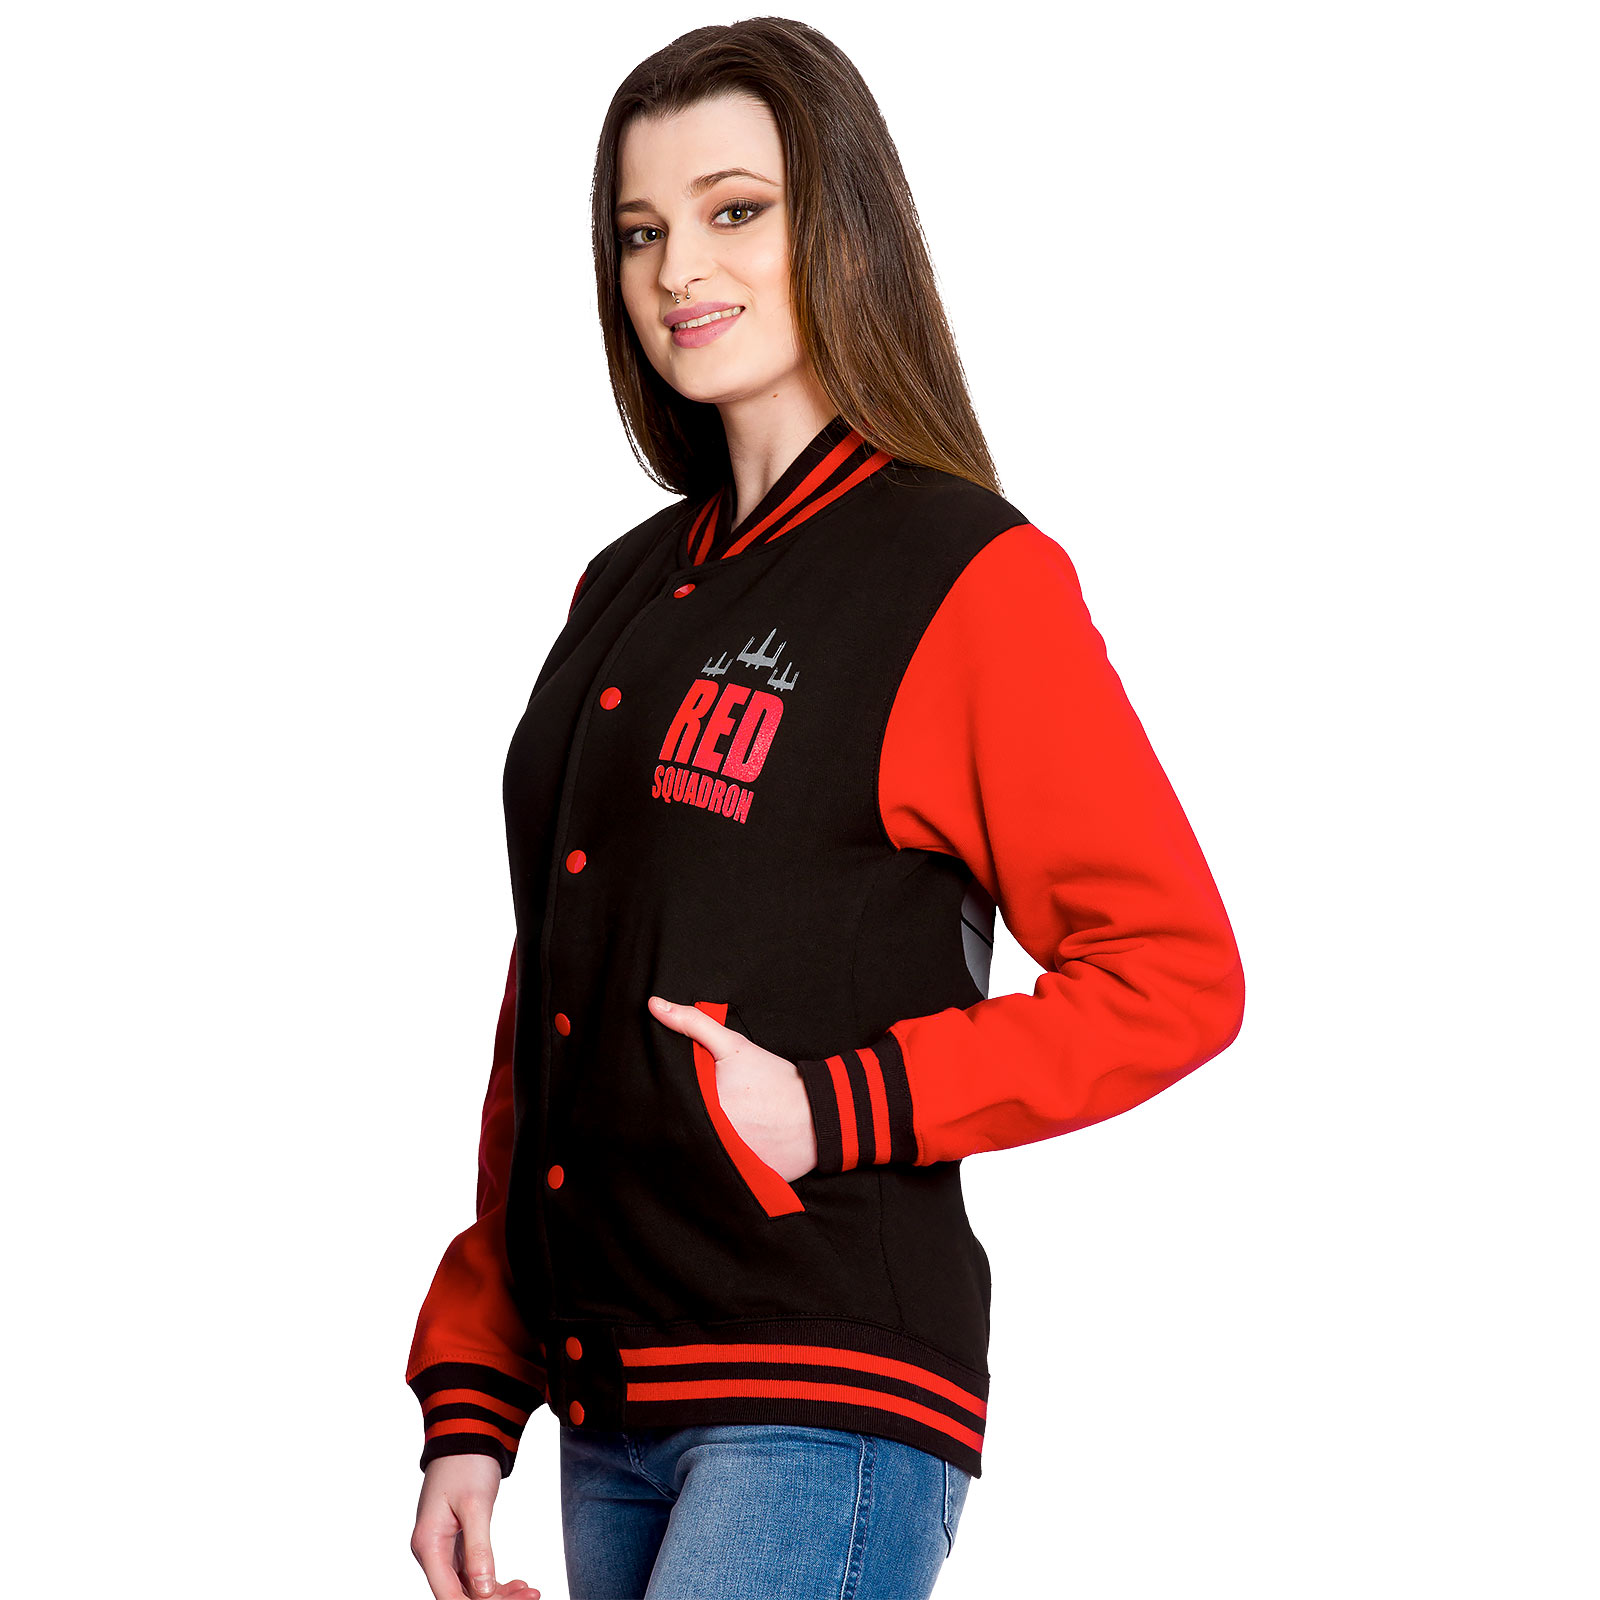 Rogue One College Jacke - Red Squadron Star Wars